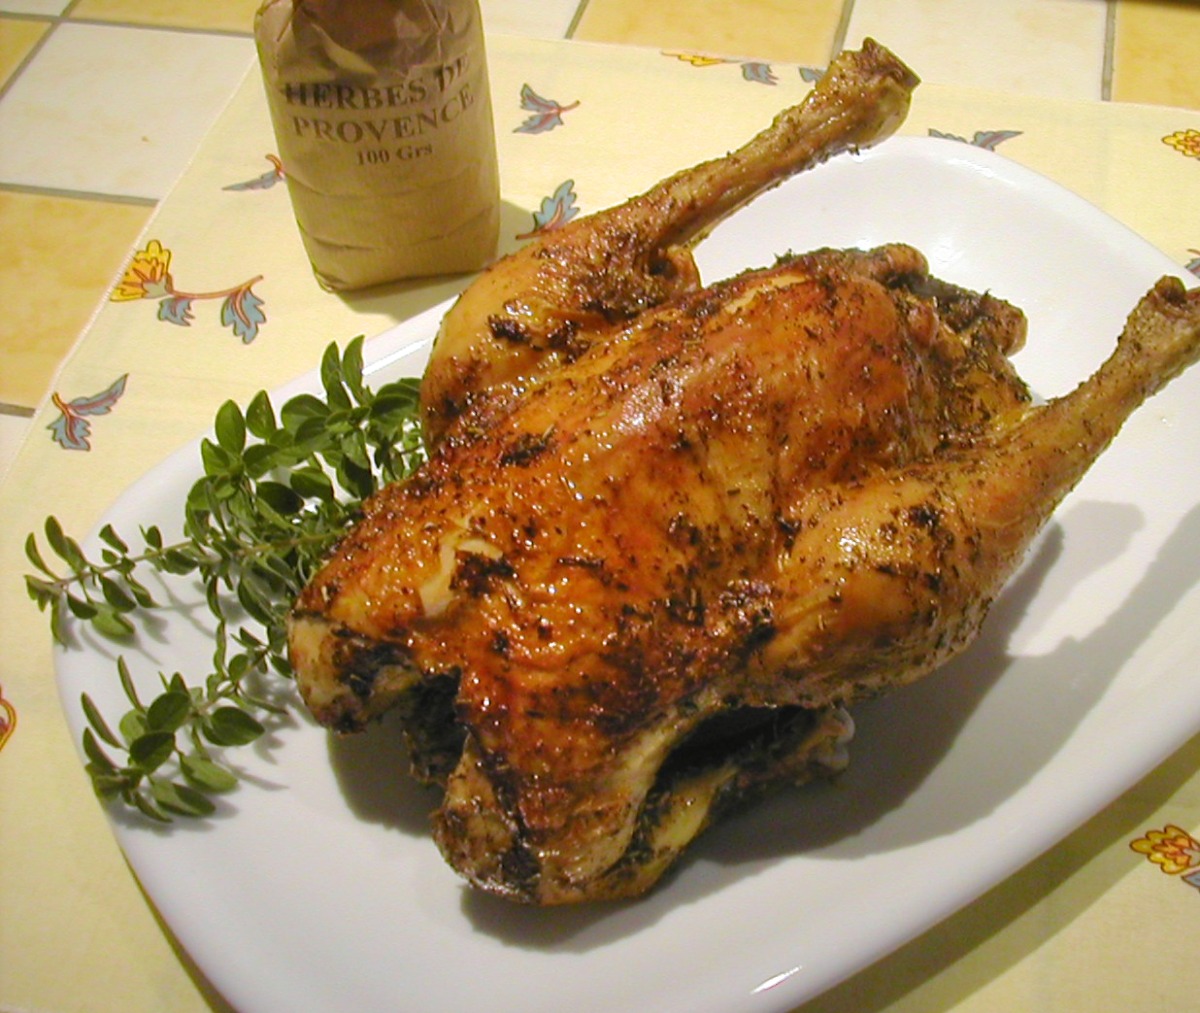 Roasted Chicken with Provençal Herbs Recipe